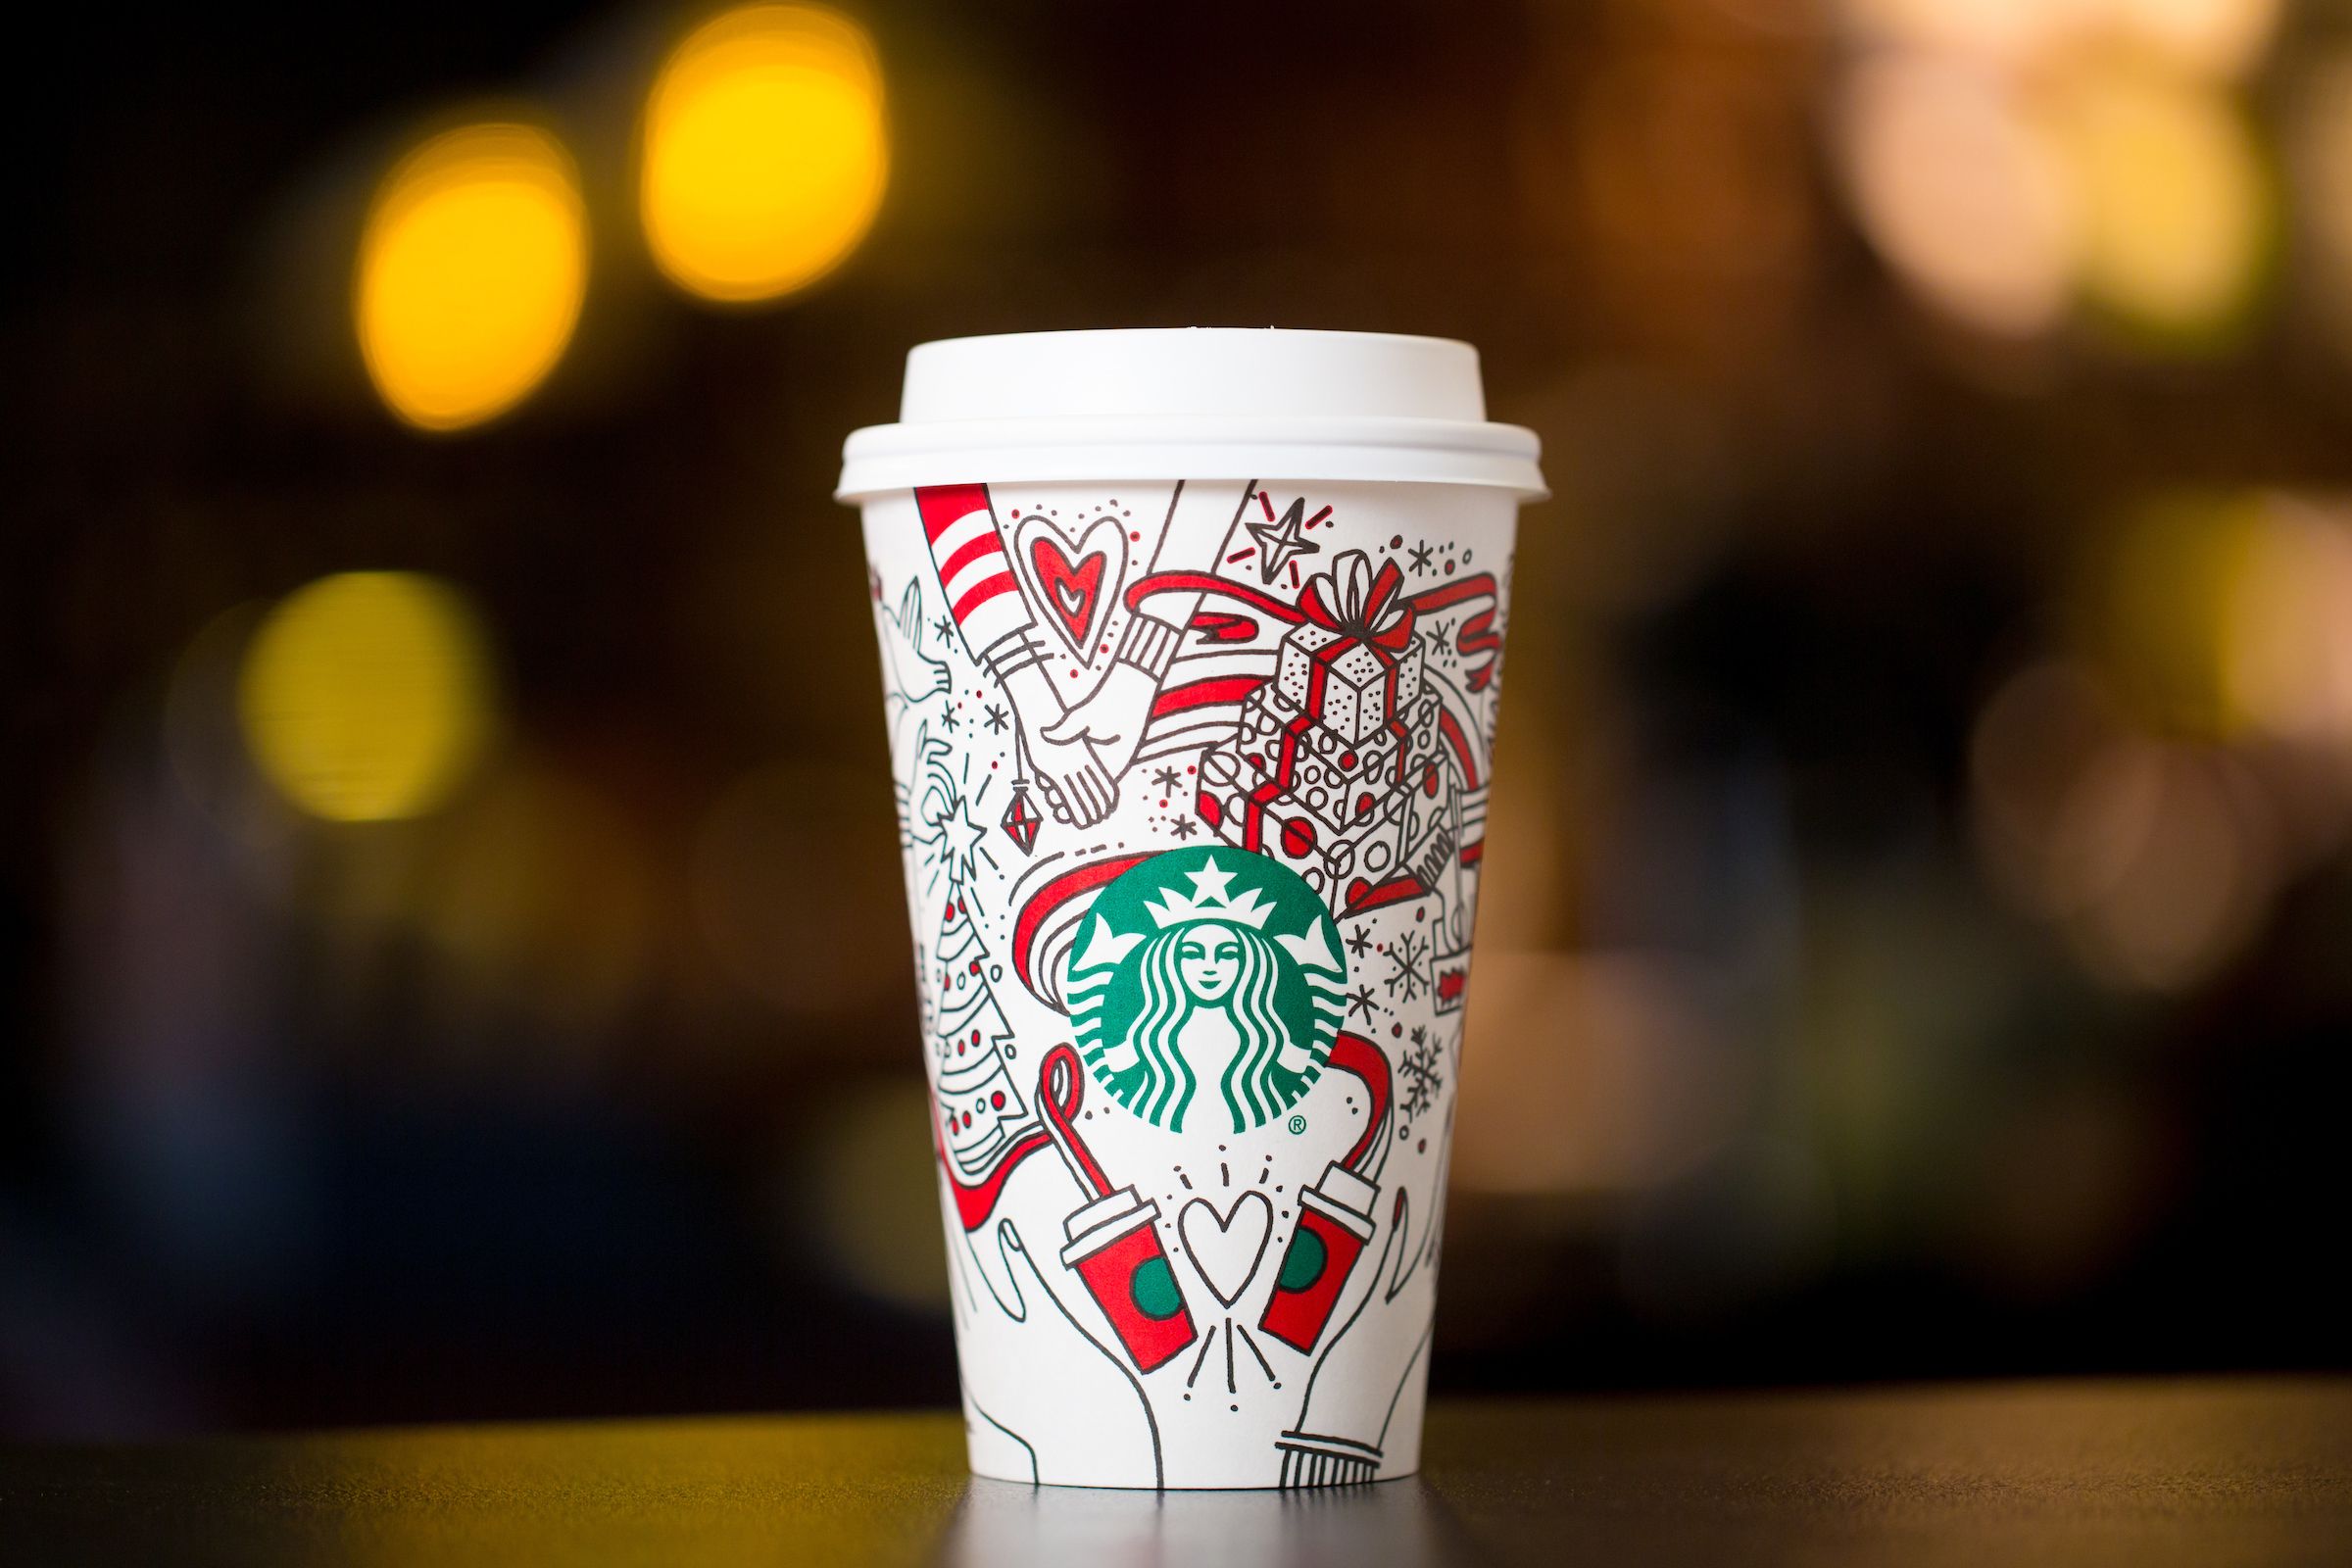 2017 coloring book of a cup encapsulates personalized and interactive marketing